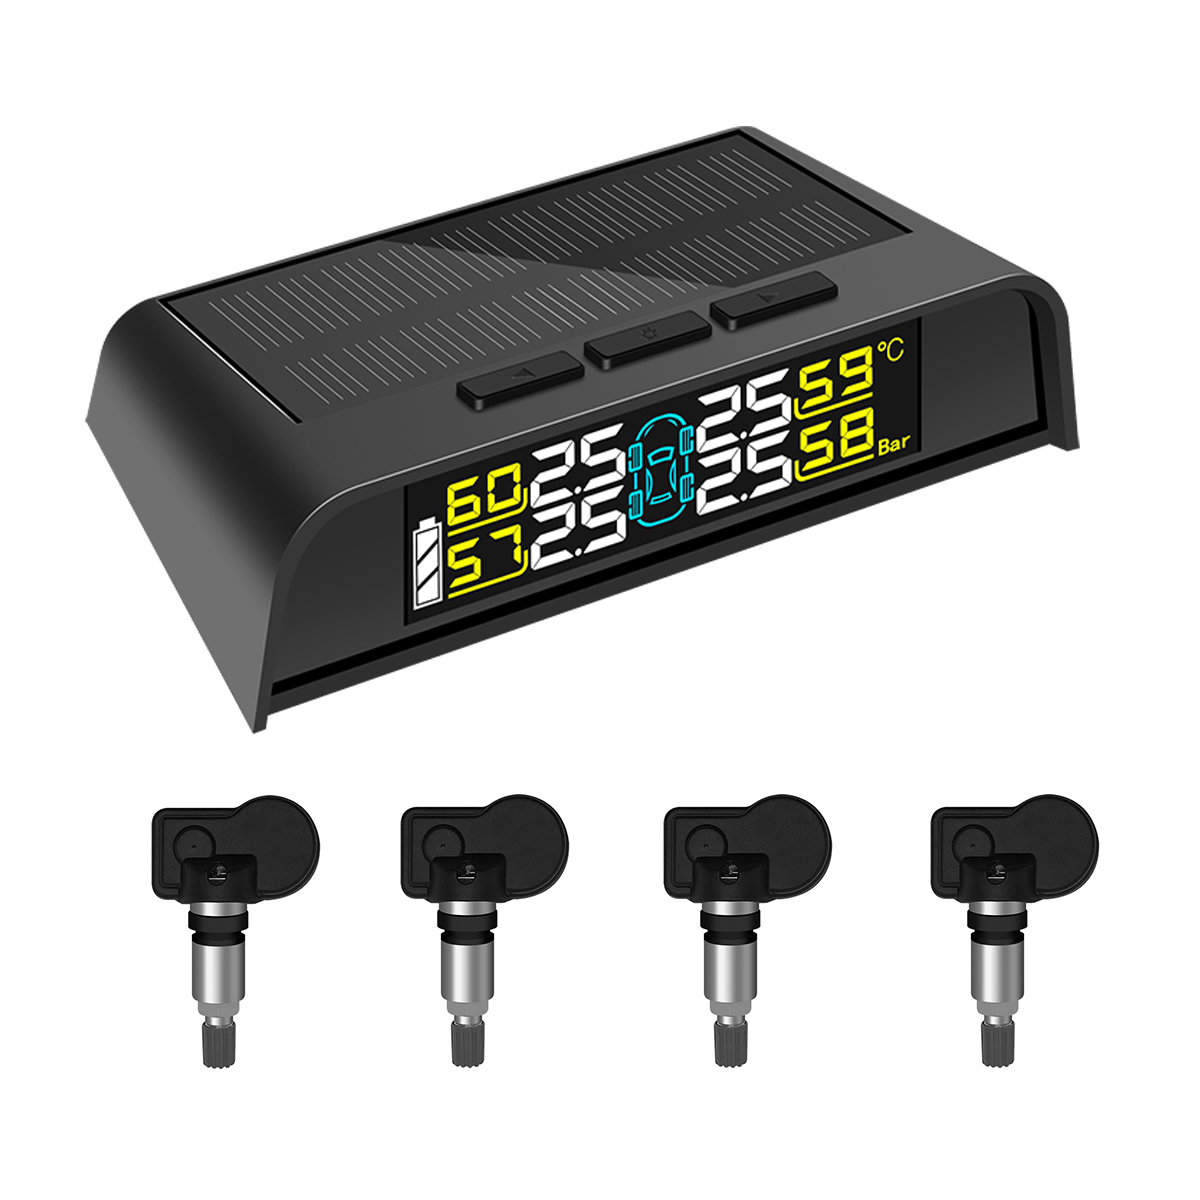 Wholesale China Tire Pressure Sensor Tester Suppliers Quotes –  Wired TPMS For cars Tire pressure monitoring system with Japanese battery,stable performance  – Minpn